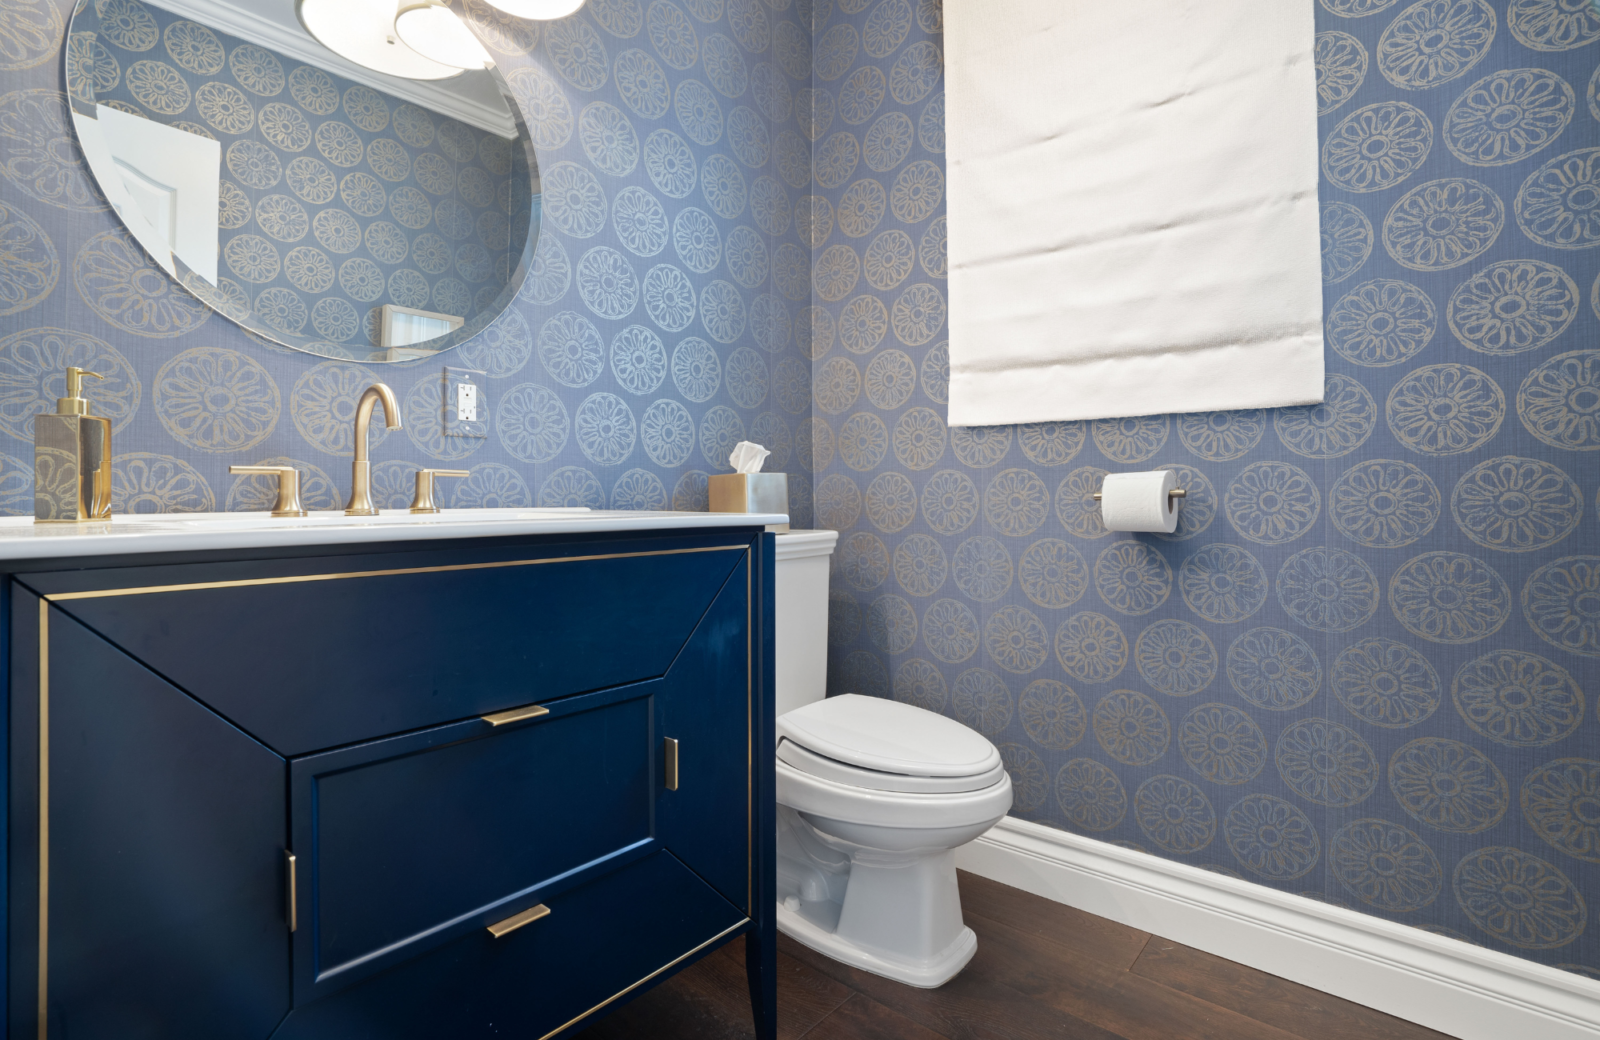 pamela-sandall-design-los-angeles-ca-statement-wallpaper-powder-room-with-navy-vanity-with-matching-navy-and-gold-wallpaper